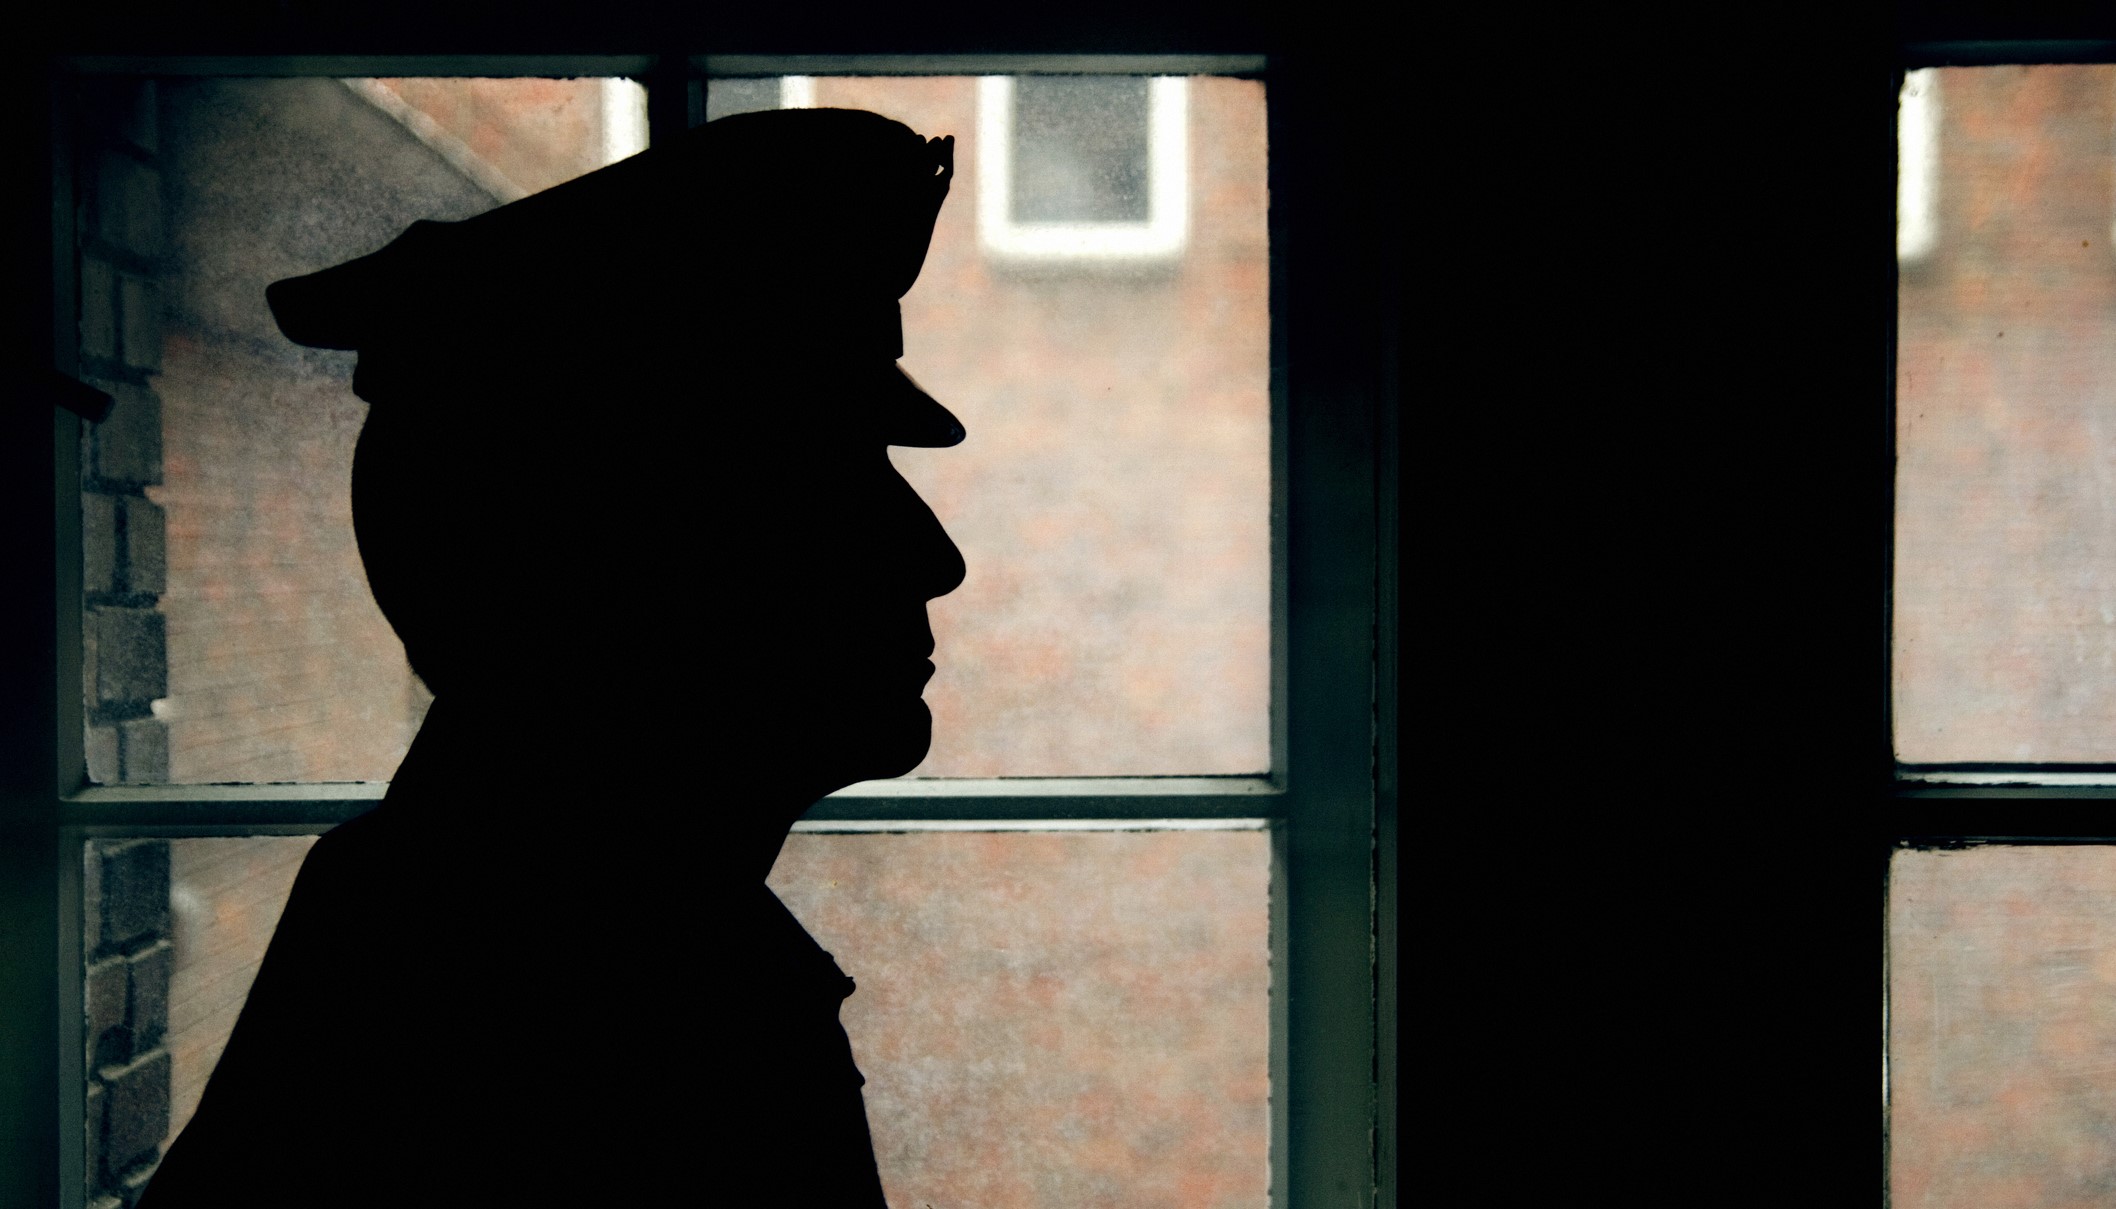 Silhouette of officer against a window